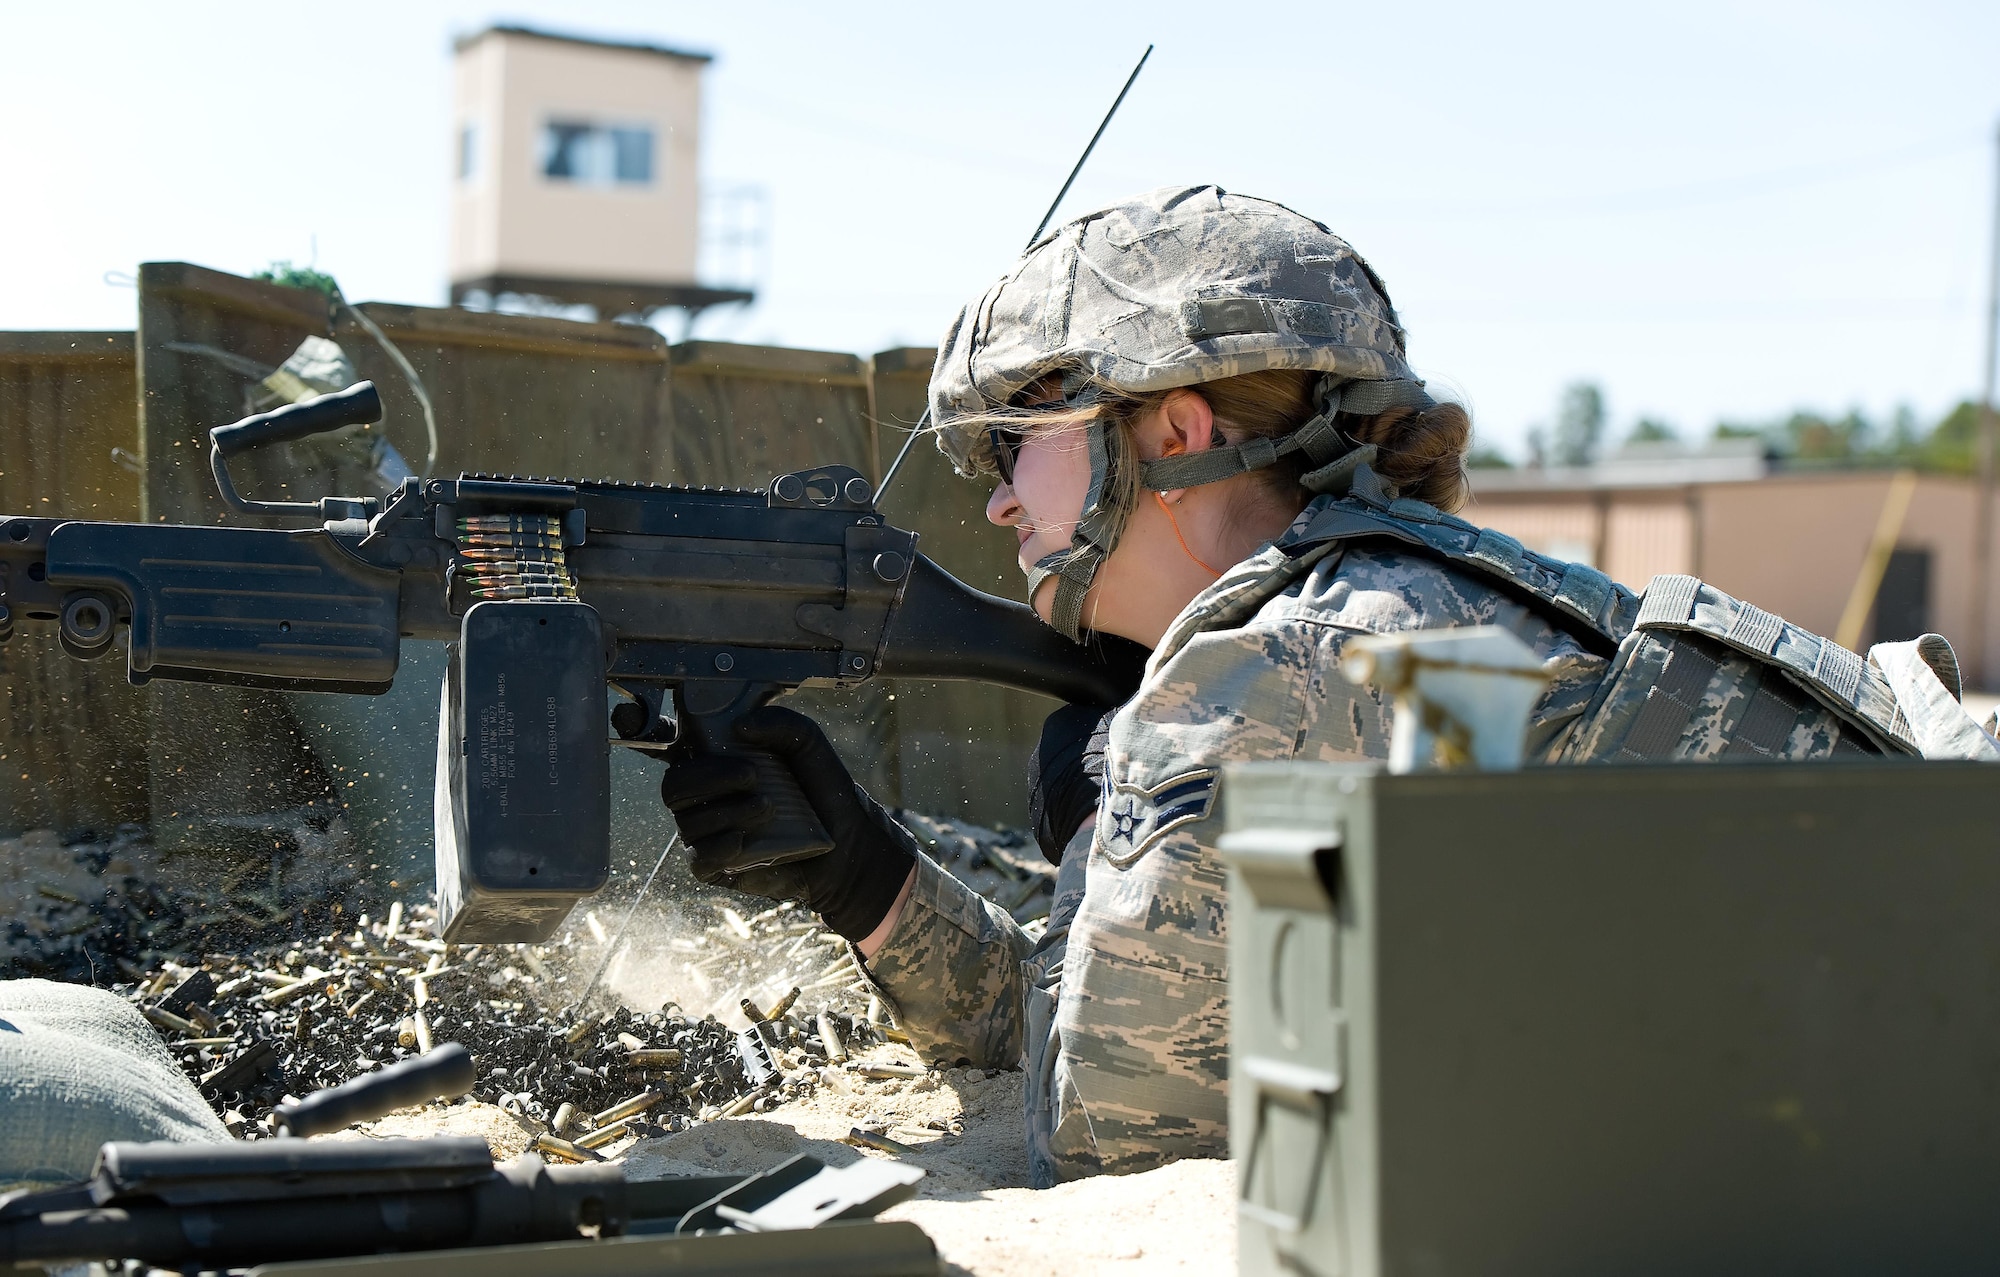 Airman 1st Class Annamae Prentiss, 436th Security Forces Squadron response force member, fires a M-249 Light Machine Gun at decommissioned tanks placed at various distances between 200 to 1,200 meters down range, March 9, 2017, at Range 7 on Joint Base McGuire-Dix-Lakehurst, N.J. Prentiss, assigned to Dover Air Force Base, Del., fired the M-249 loaded with 200 rounds of 5.56mm ammunition containing green-tipped frangible and orange/red-tipped tracer rounds placed in an assault pack. (U.S. Air Force photo by Roland Balik)